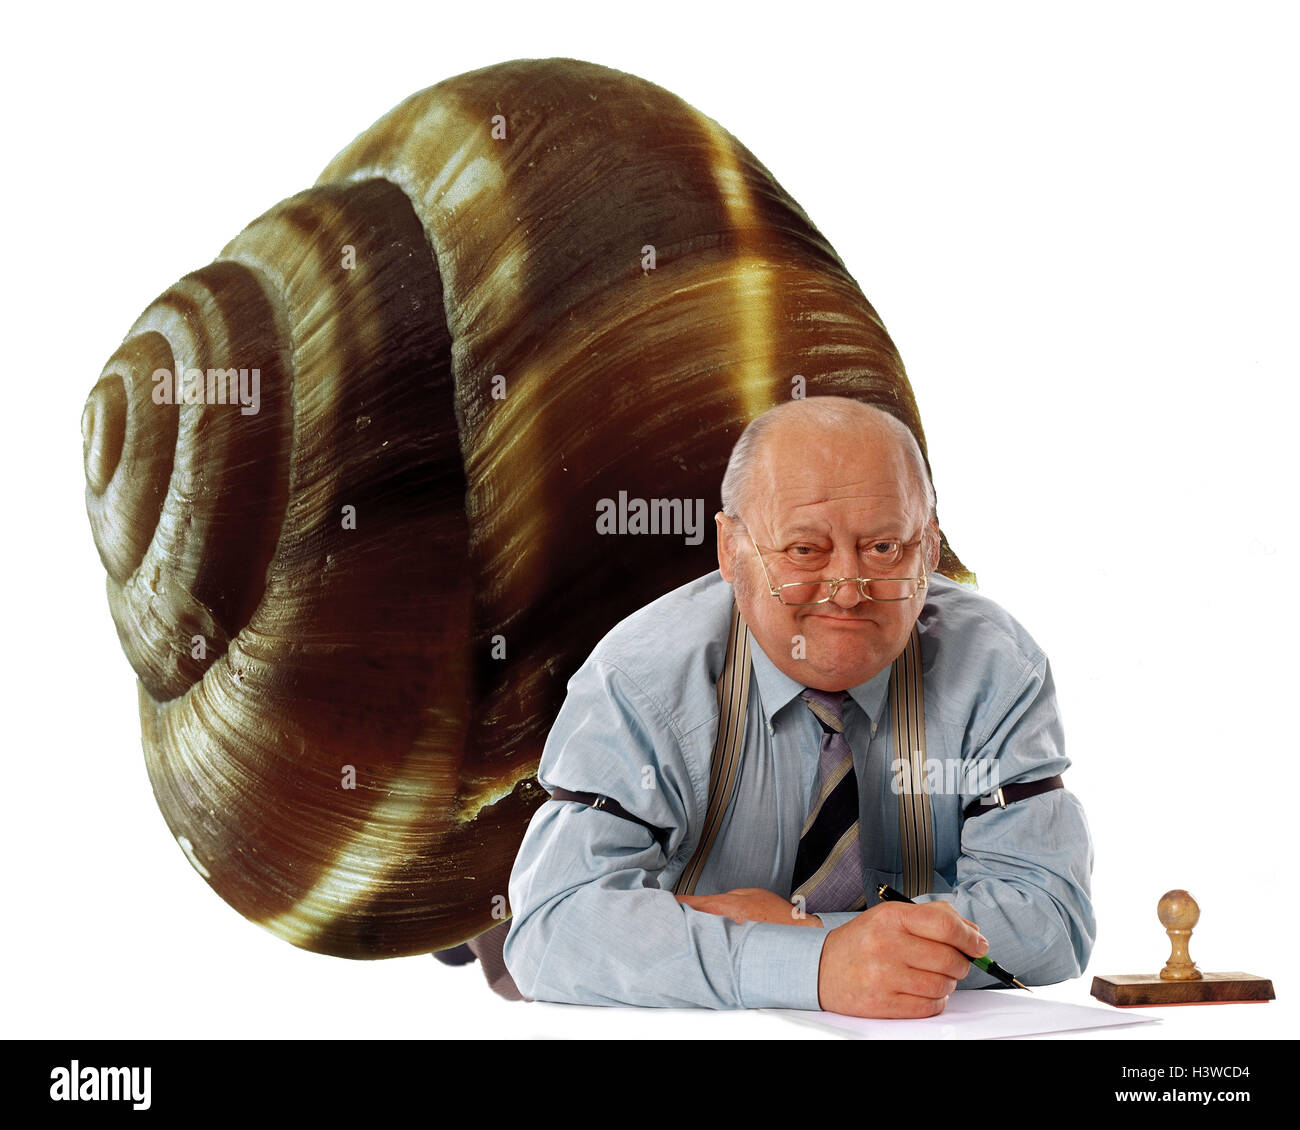 Icon, working tempo, desk, official, facial play, nail up, escargot house, Composing, professions, studio, cut out, escargot tempo, decayed, laziness, slyness, half-heartedly, listlessness, Stock Photo